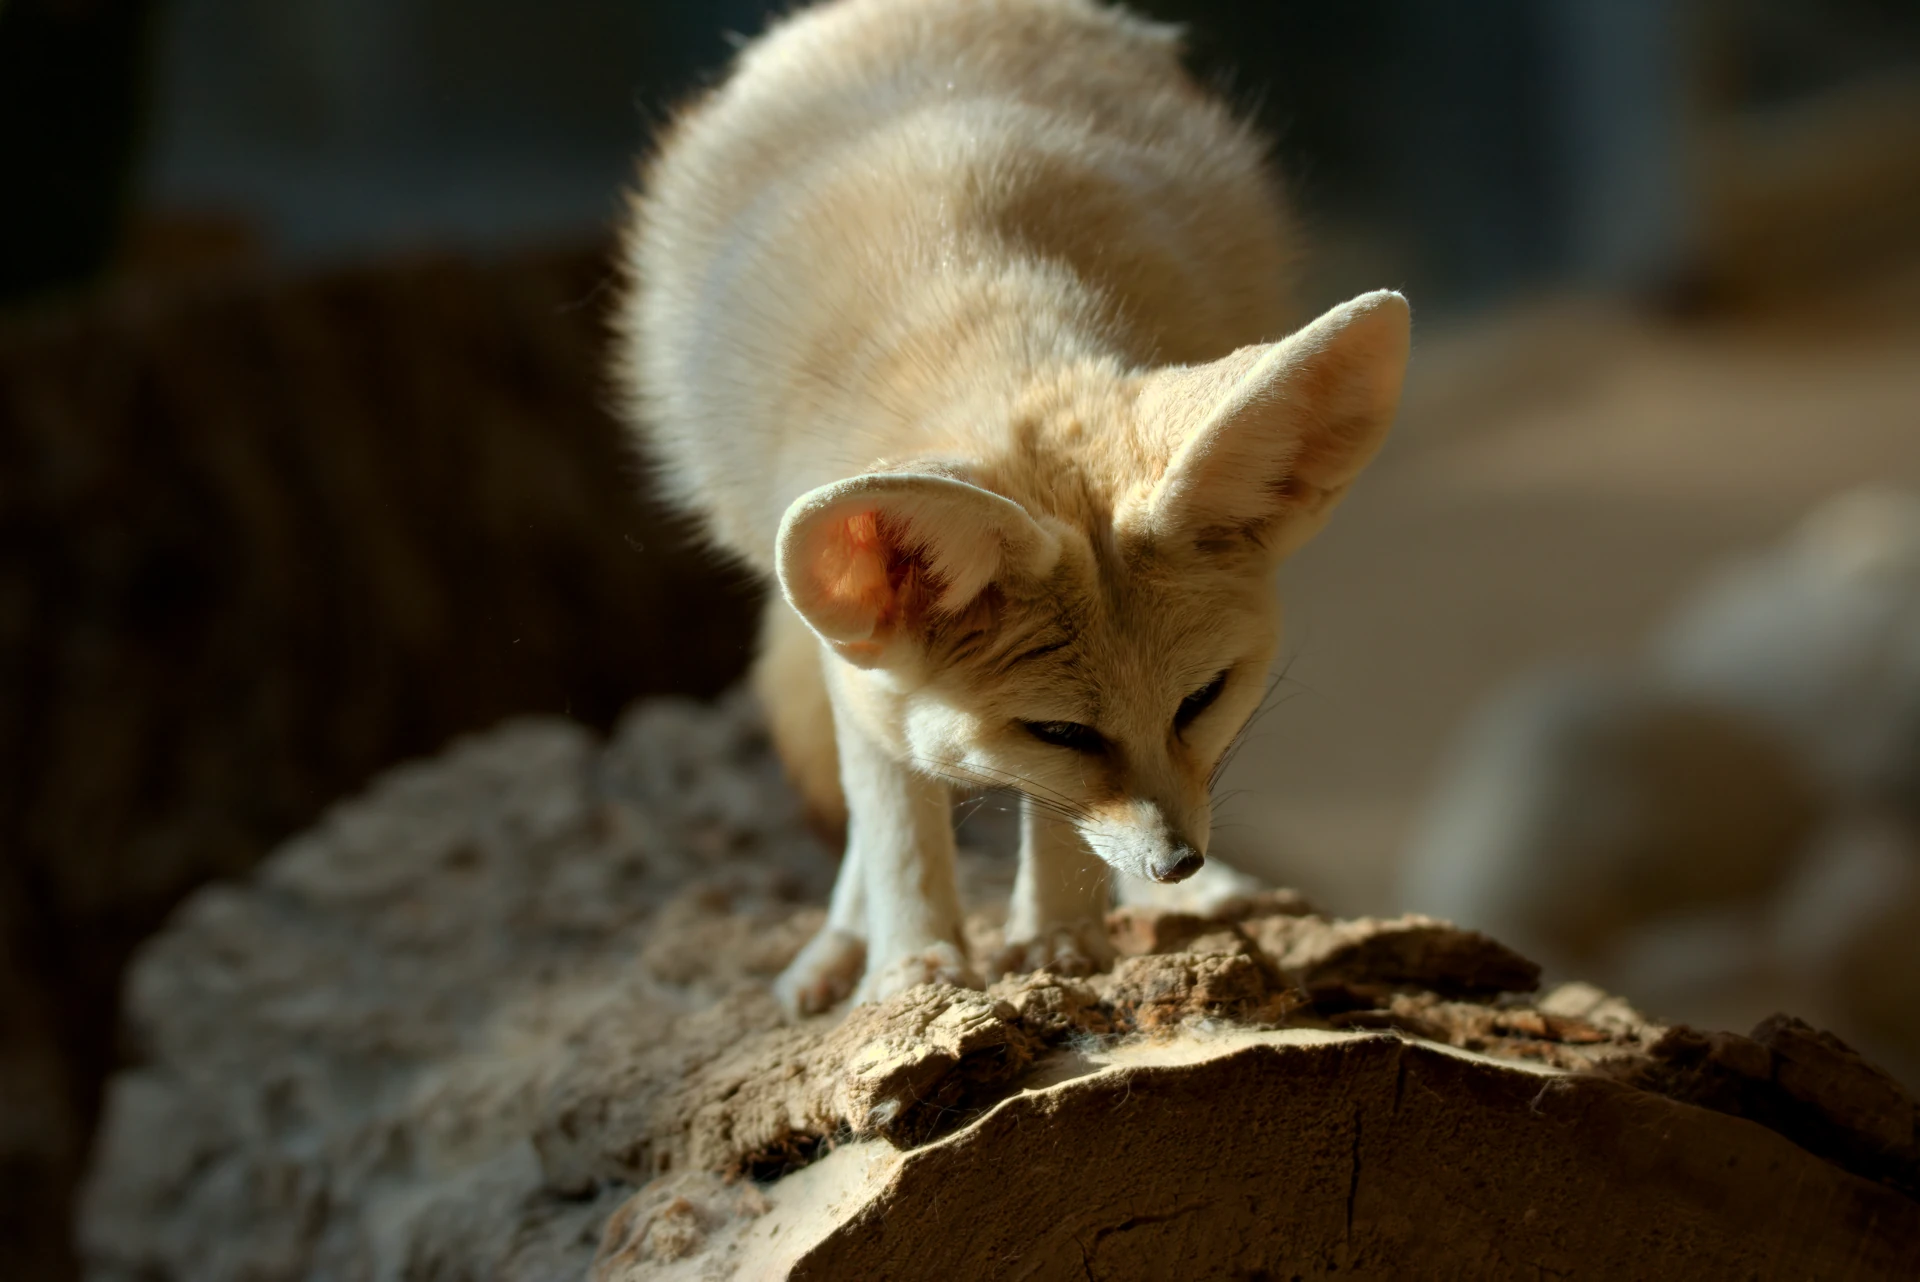 A fennec fox standing on a tree log section sniffing something on it.